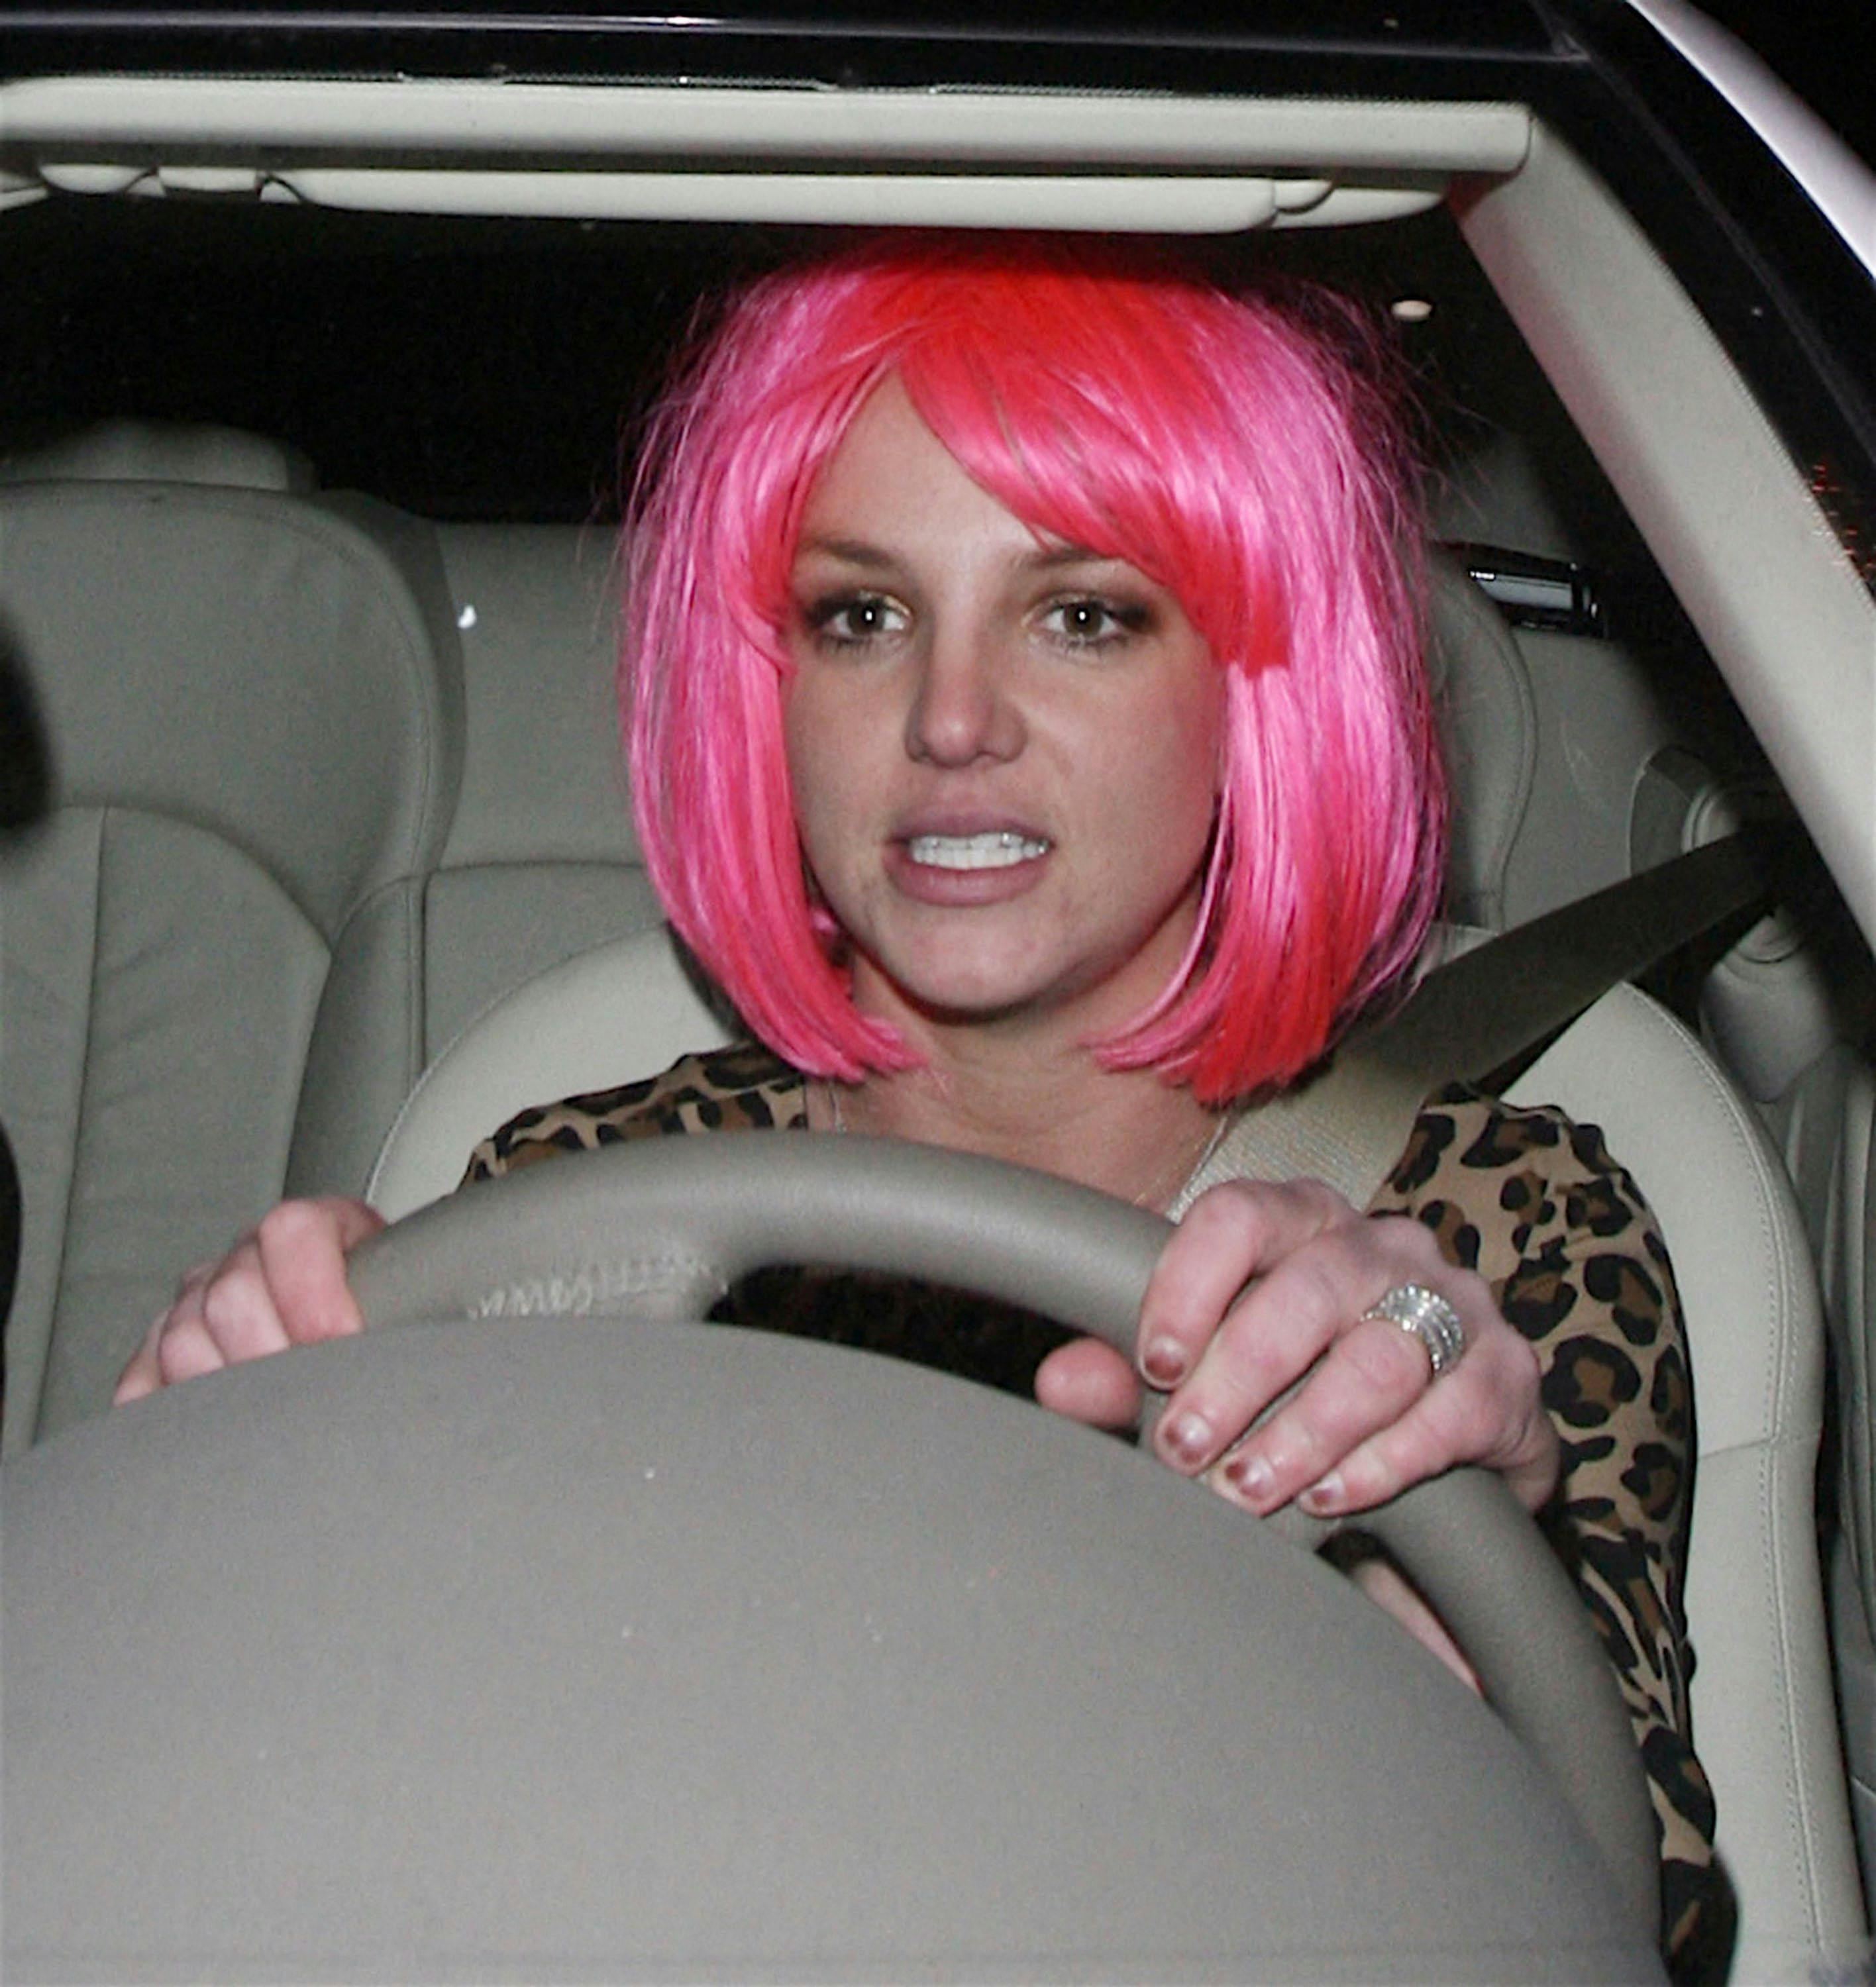 Party animal Britney Spears arrives at The Peninsula Hotel at 2am wearing a leopard print dress complete with ripped fishnet tights and her trademark pink wig<0x0a>Beverly Hills, California - 23.12.07<0x0a>Credit: (Mandatory): Owen Beiny / WENN Newscom/(Mega Agency TagID: wennphotos773022.jpg) [Photo via Mega Agency]